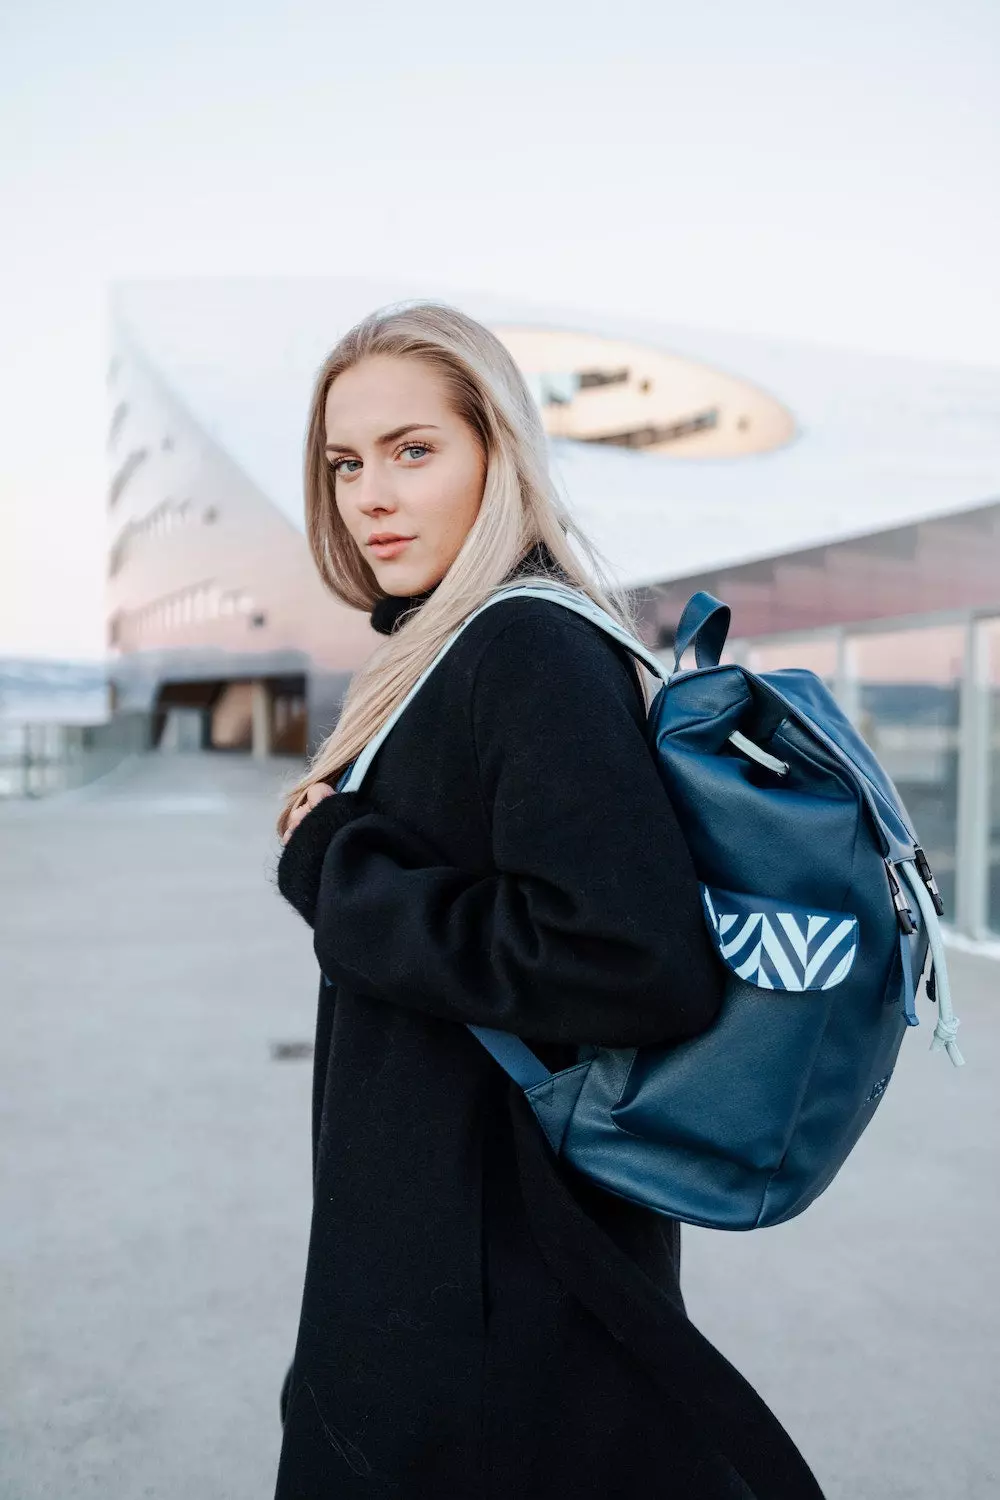 event planner outfit backpack